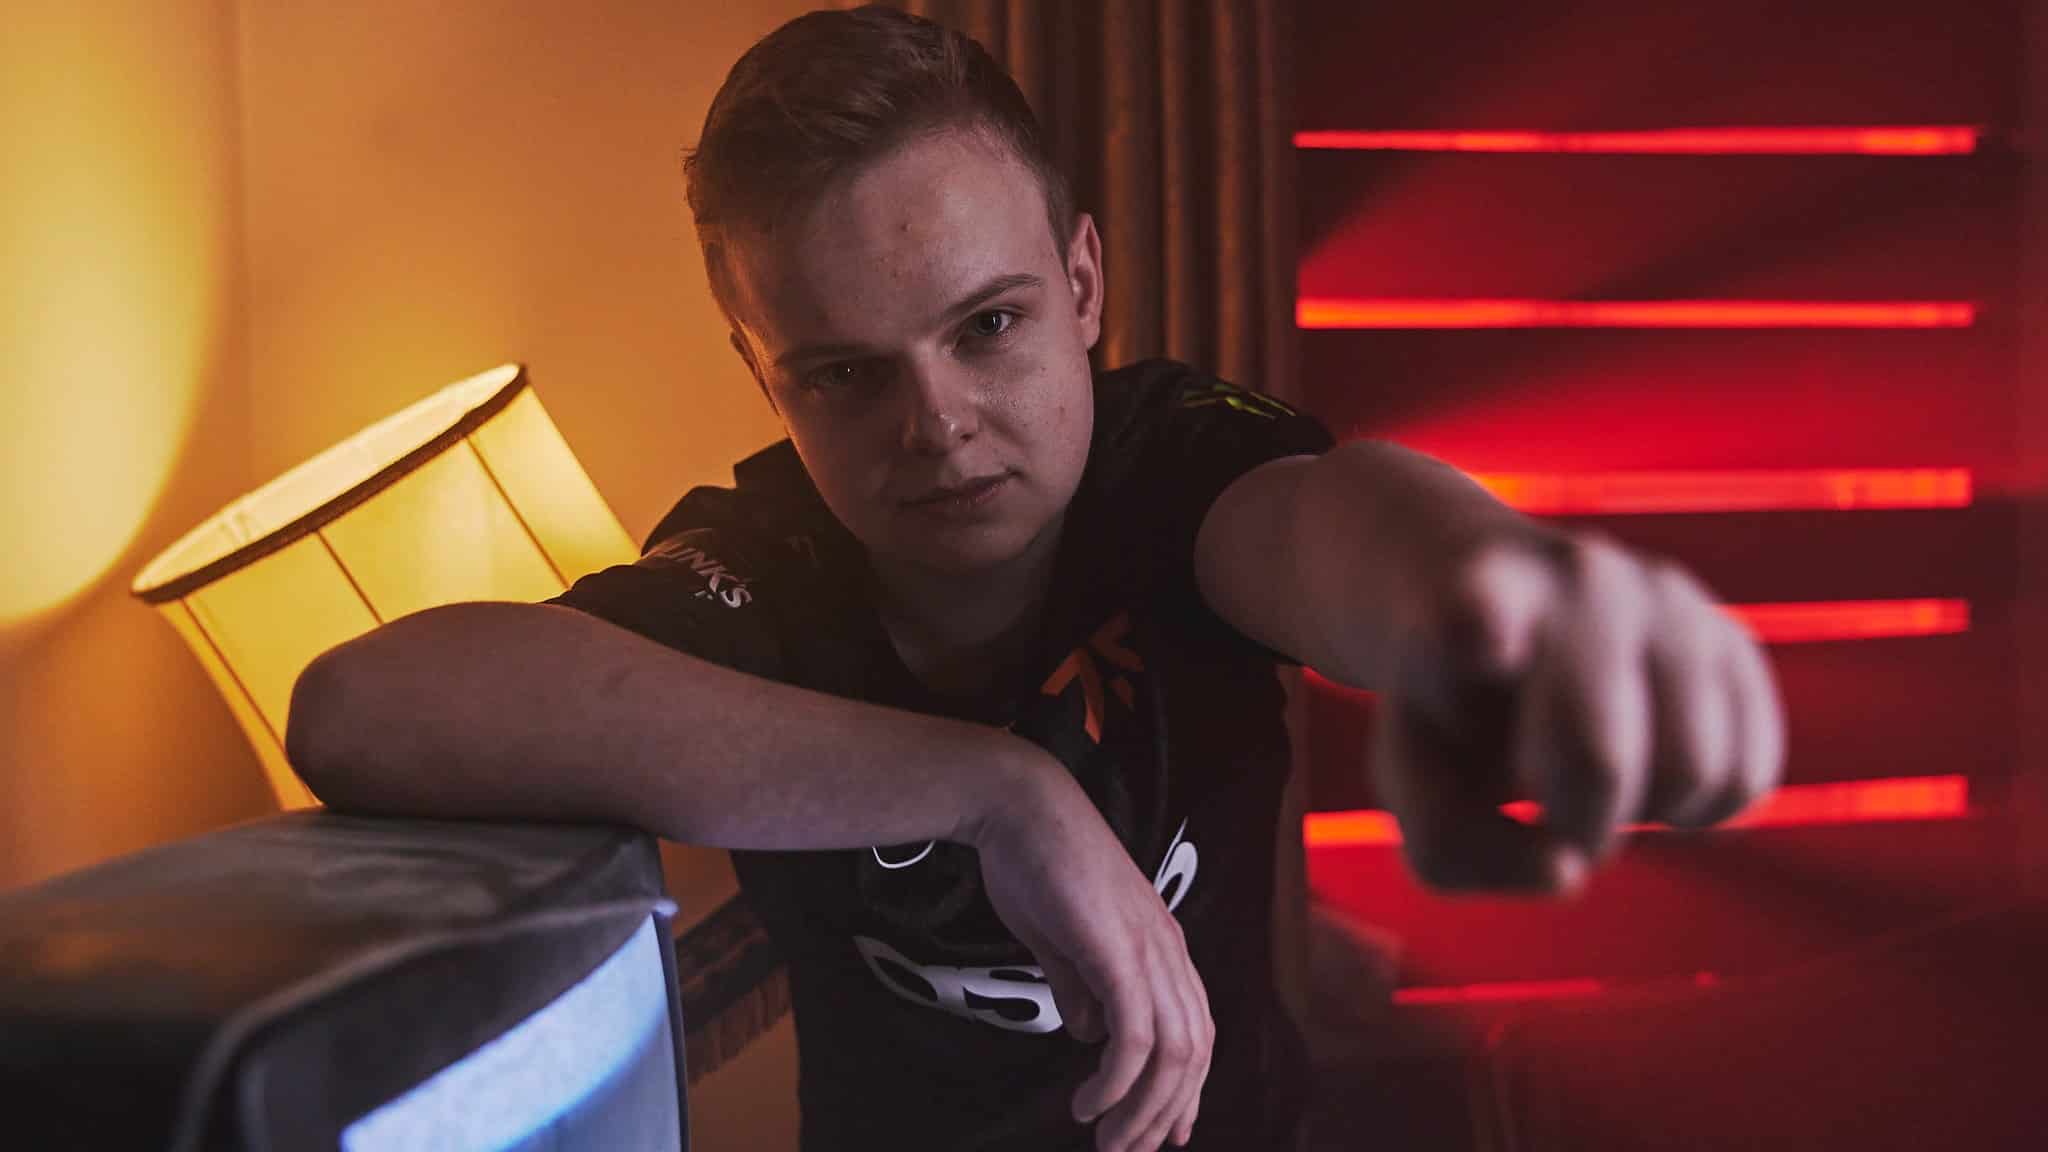 Fnatic's Magnum points at the camera.